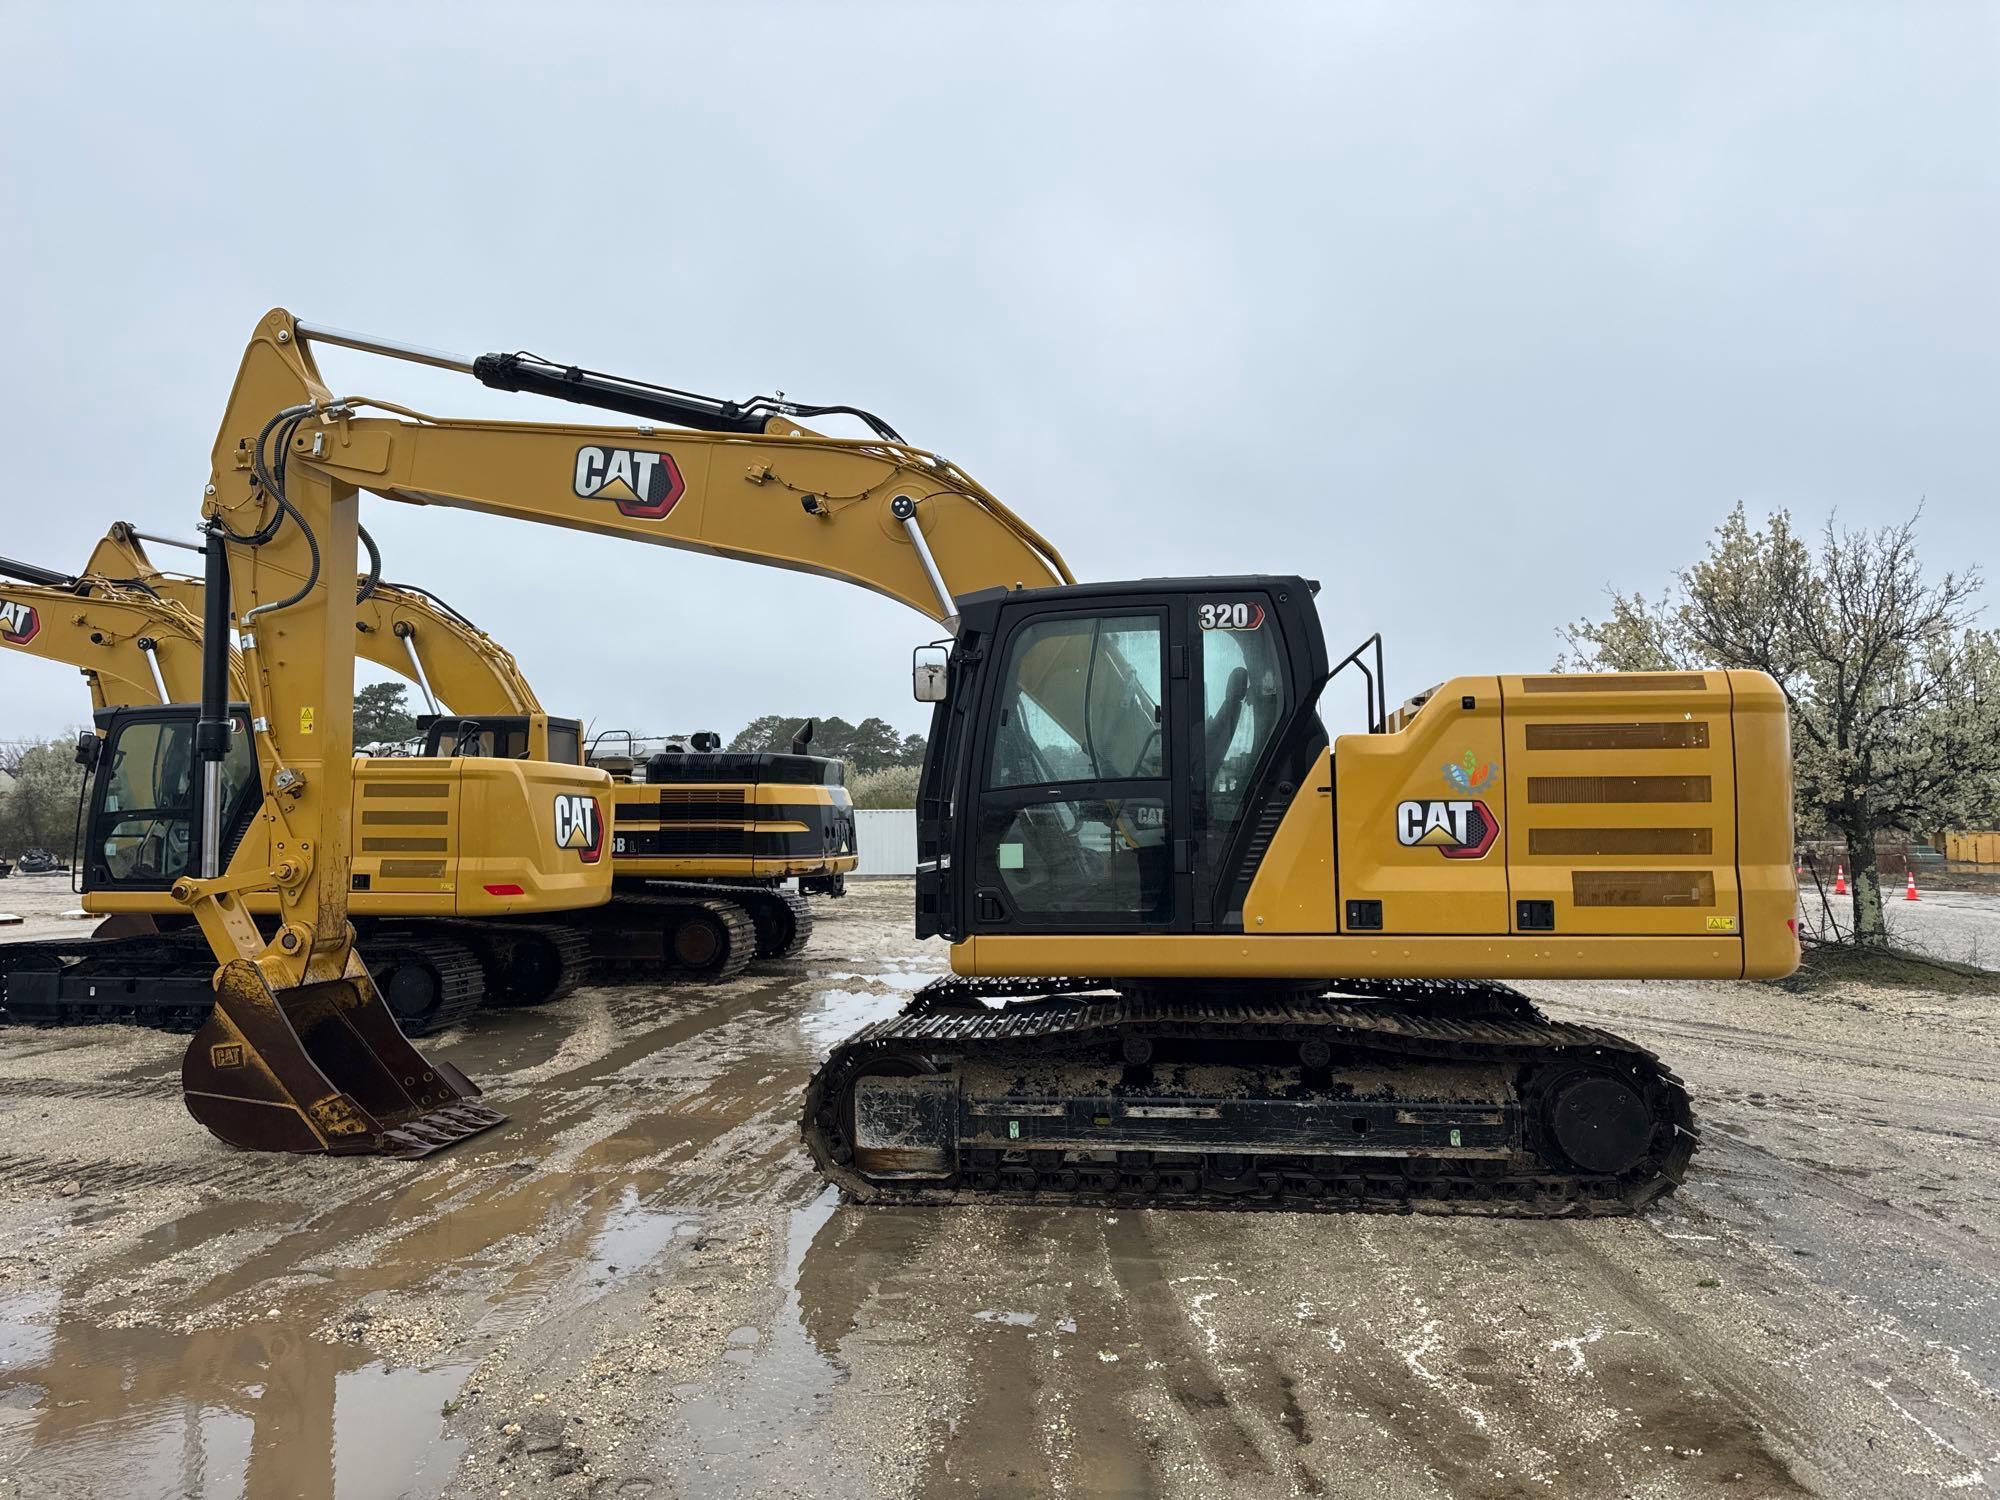 2022 CAT 320 2D HYDRAULIC EXCAVATOR SN:MYK10460 powered by Cat diesel engine, equipped with Cab,